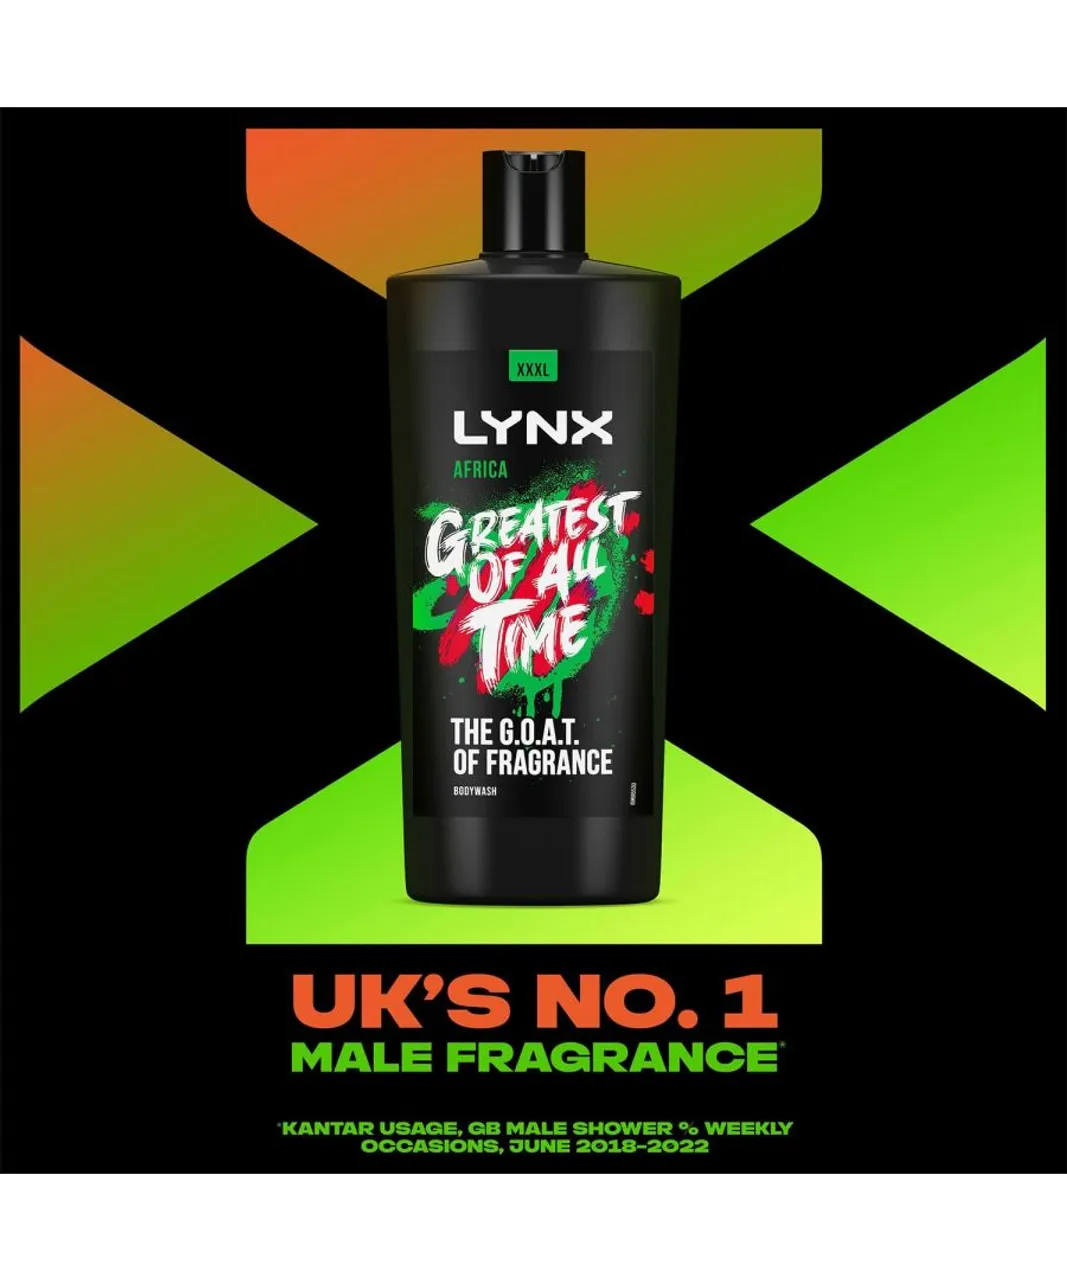 Lynx Mens G.O.A.T Shower Gel up to 12H Refreshing Fragrance XXXL Africa 700ml, 3 Pack - NA - One Size